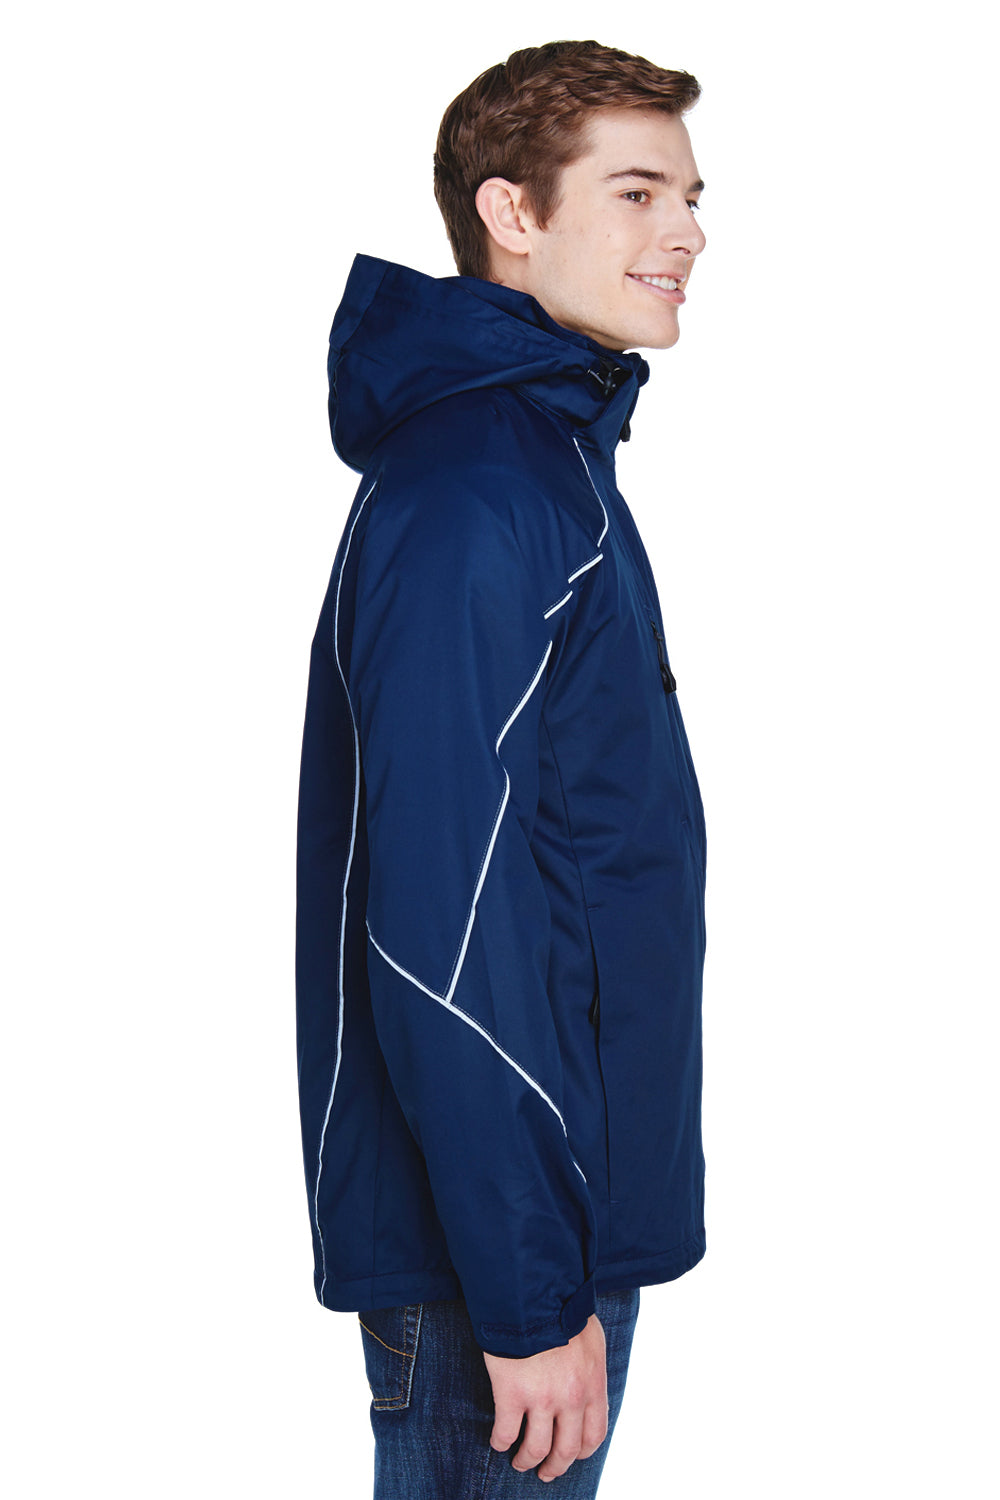 North End 88196 Mens Angle 3-in-1 Full Zip Hooded Jacket Navy Blue Side